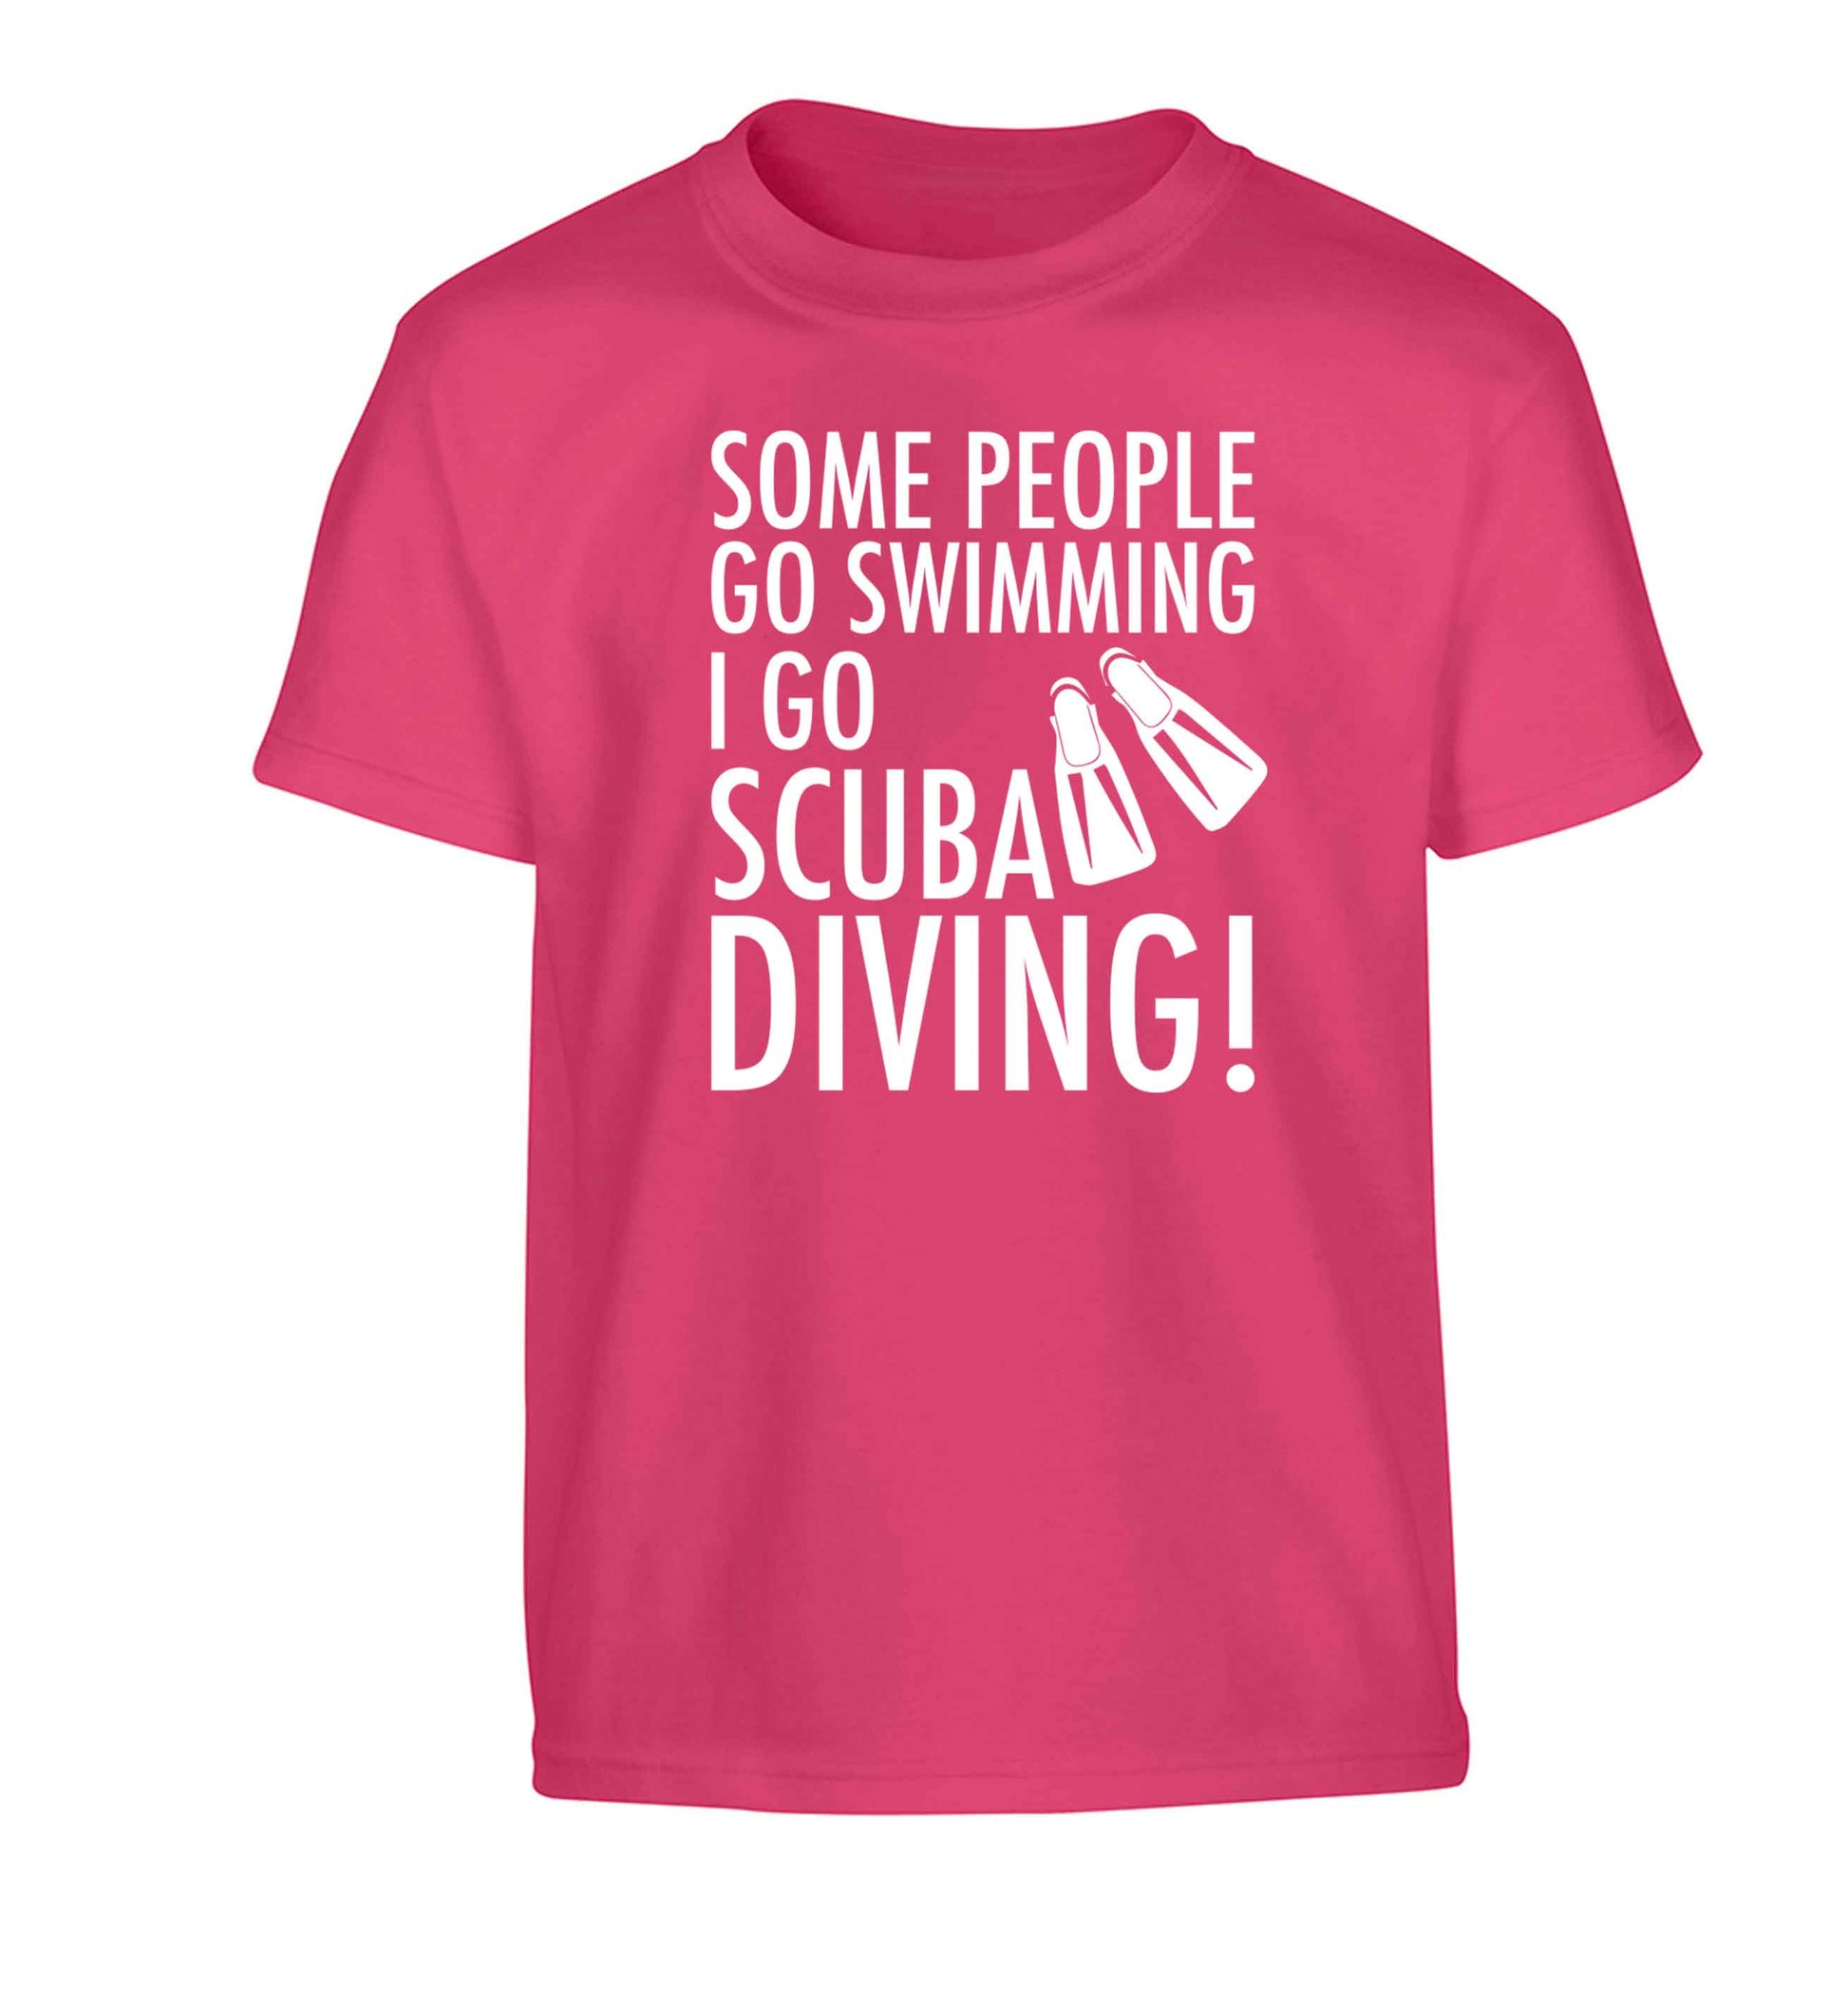 Some people go swimming I go scuba diving! Children's pink Tshirt 12-13 Years